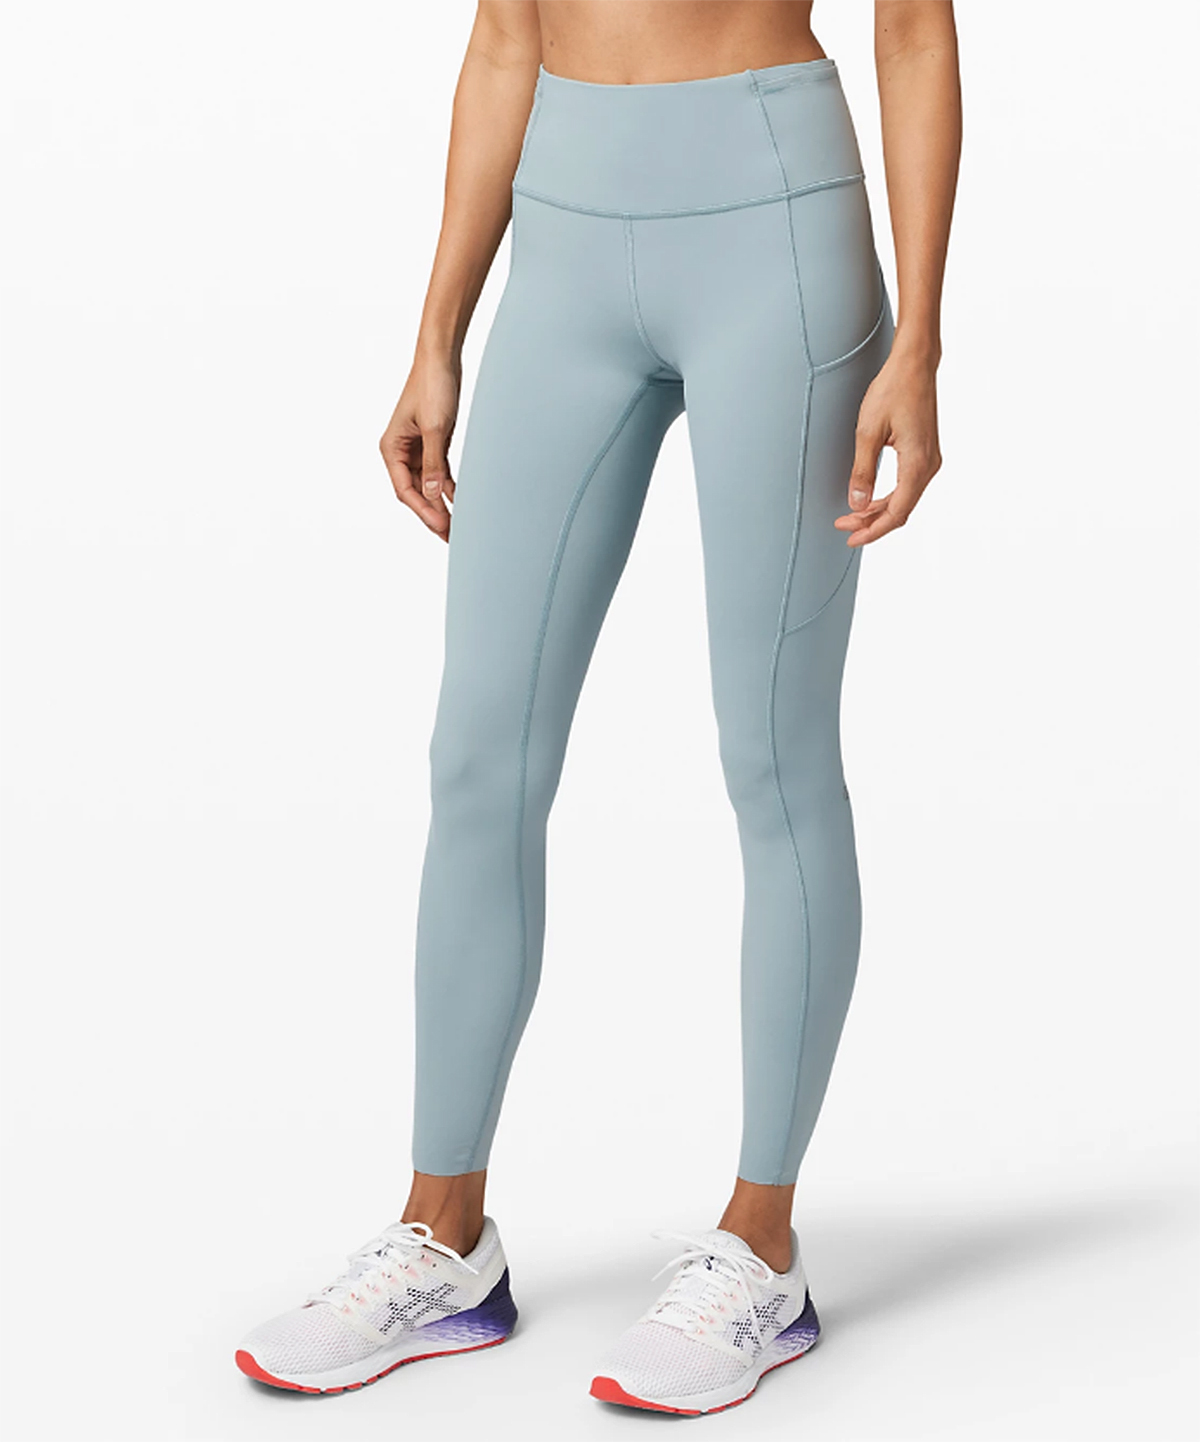 Leggings with Pockets – Workout Leggings with Pockets